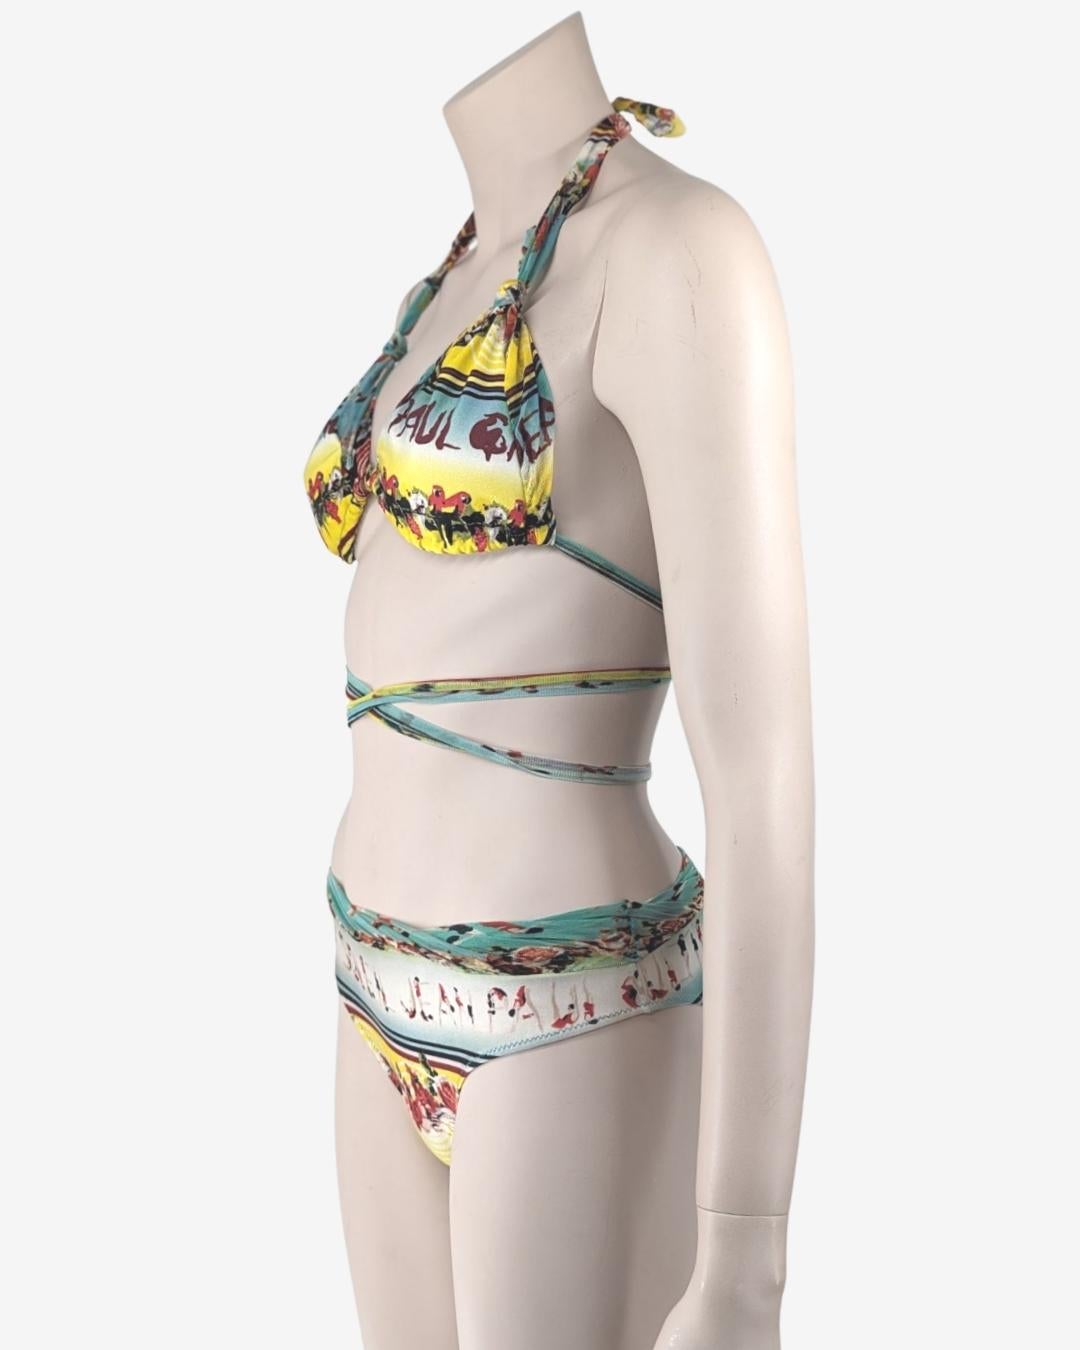 Jean Paul Gaultier Soleil Swimsuit two- pieces
Amazing details of floral print , girls in swimsuit and parrots.

Size S